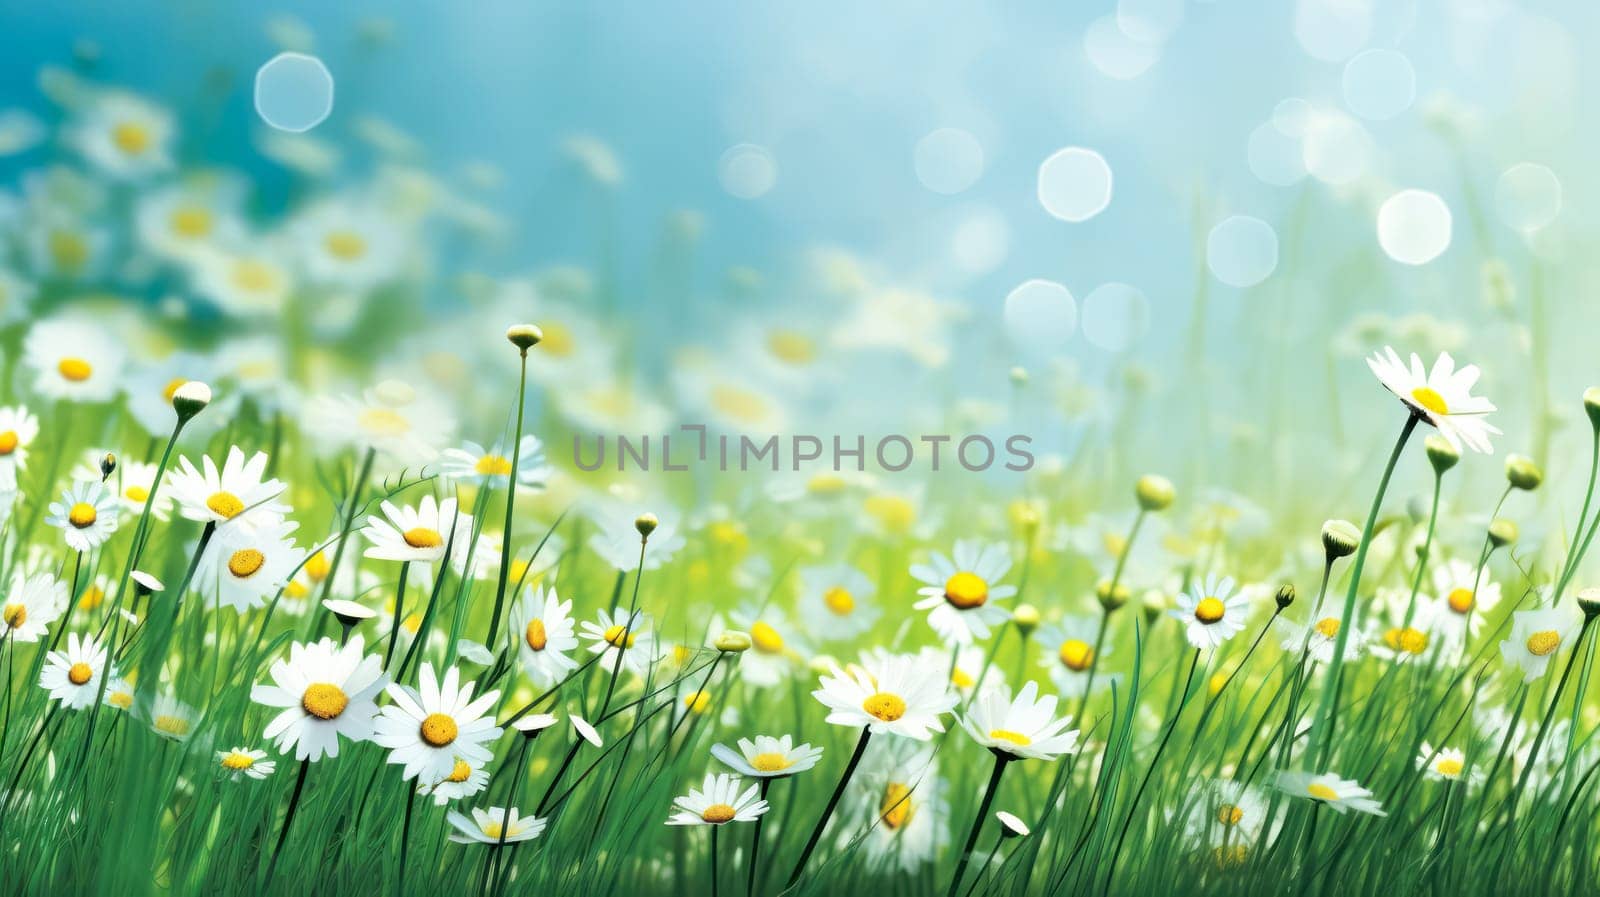 Elegant wild daisies grace the meadow, their white petals contrasting with the lush green grass. A picturesque scene embodying the essence of nature and gardening.